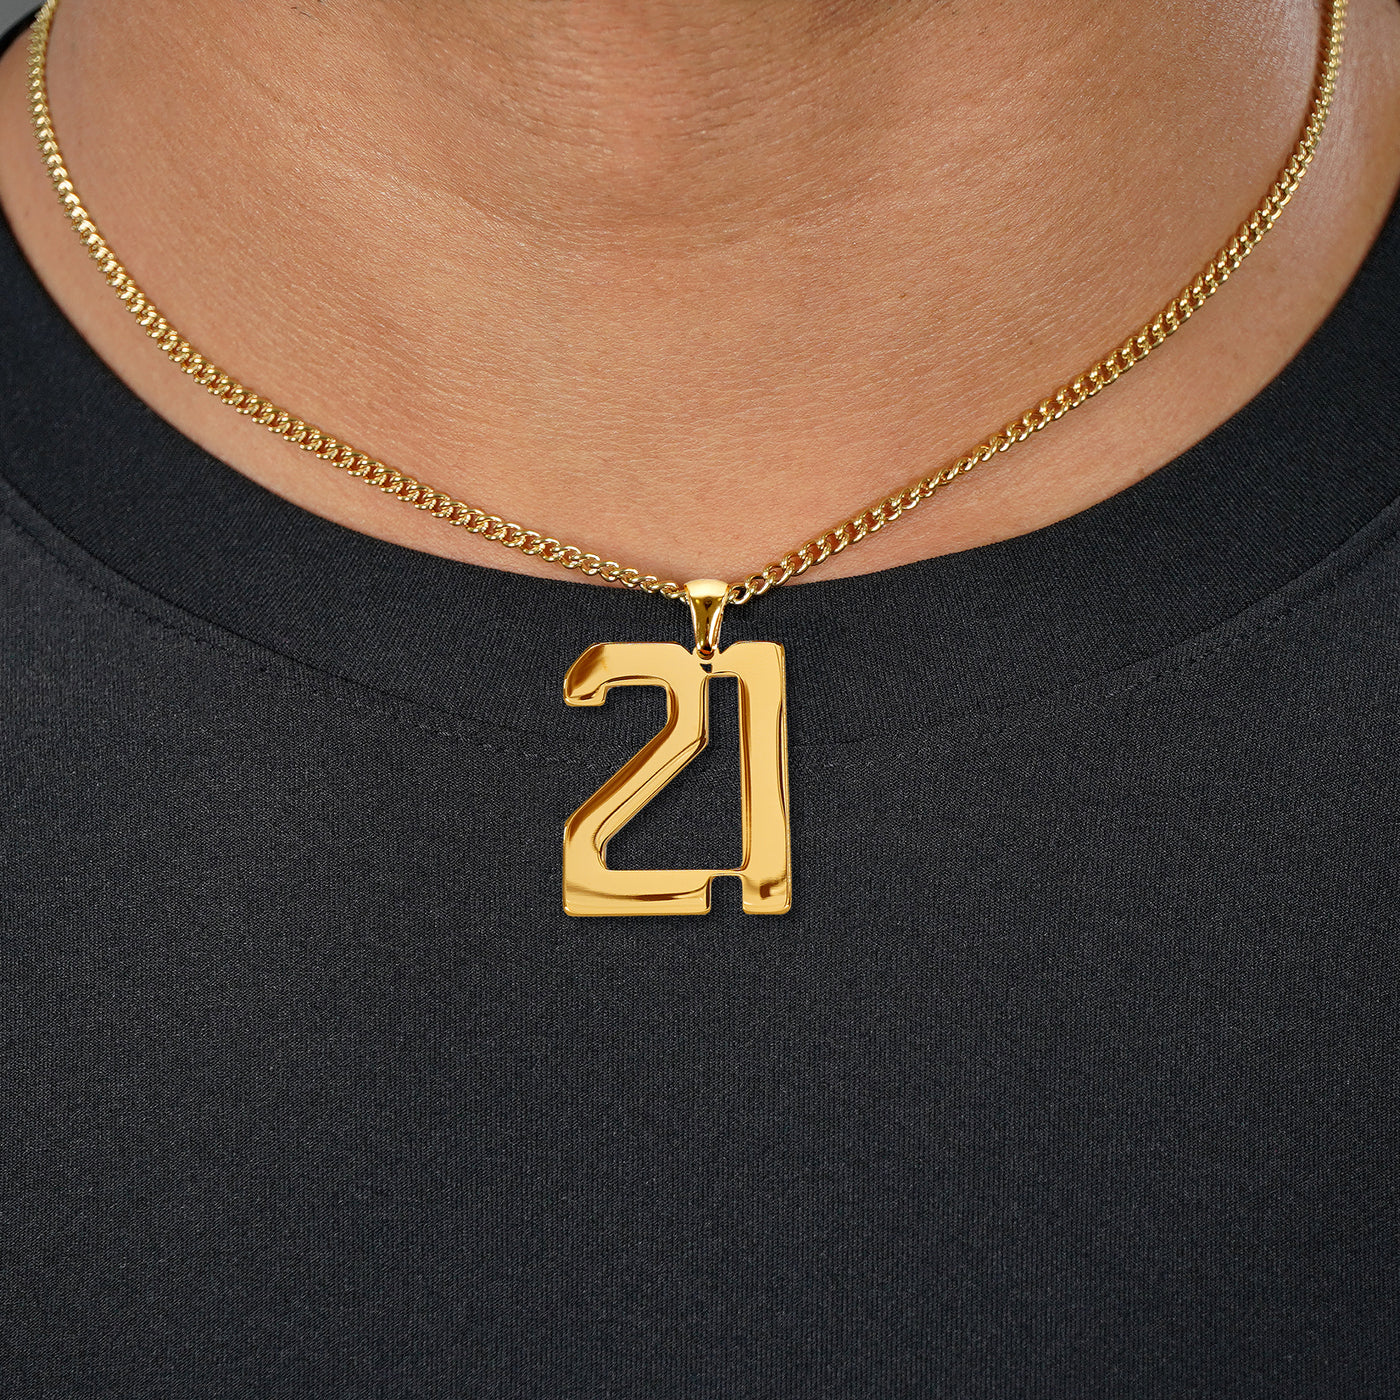 21 Number Pendant with Chain Necklace - Gold Plated Stainless Steel